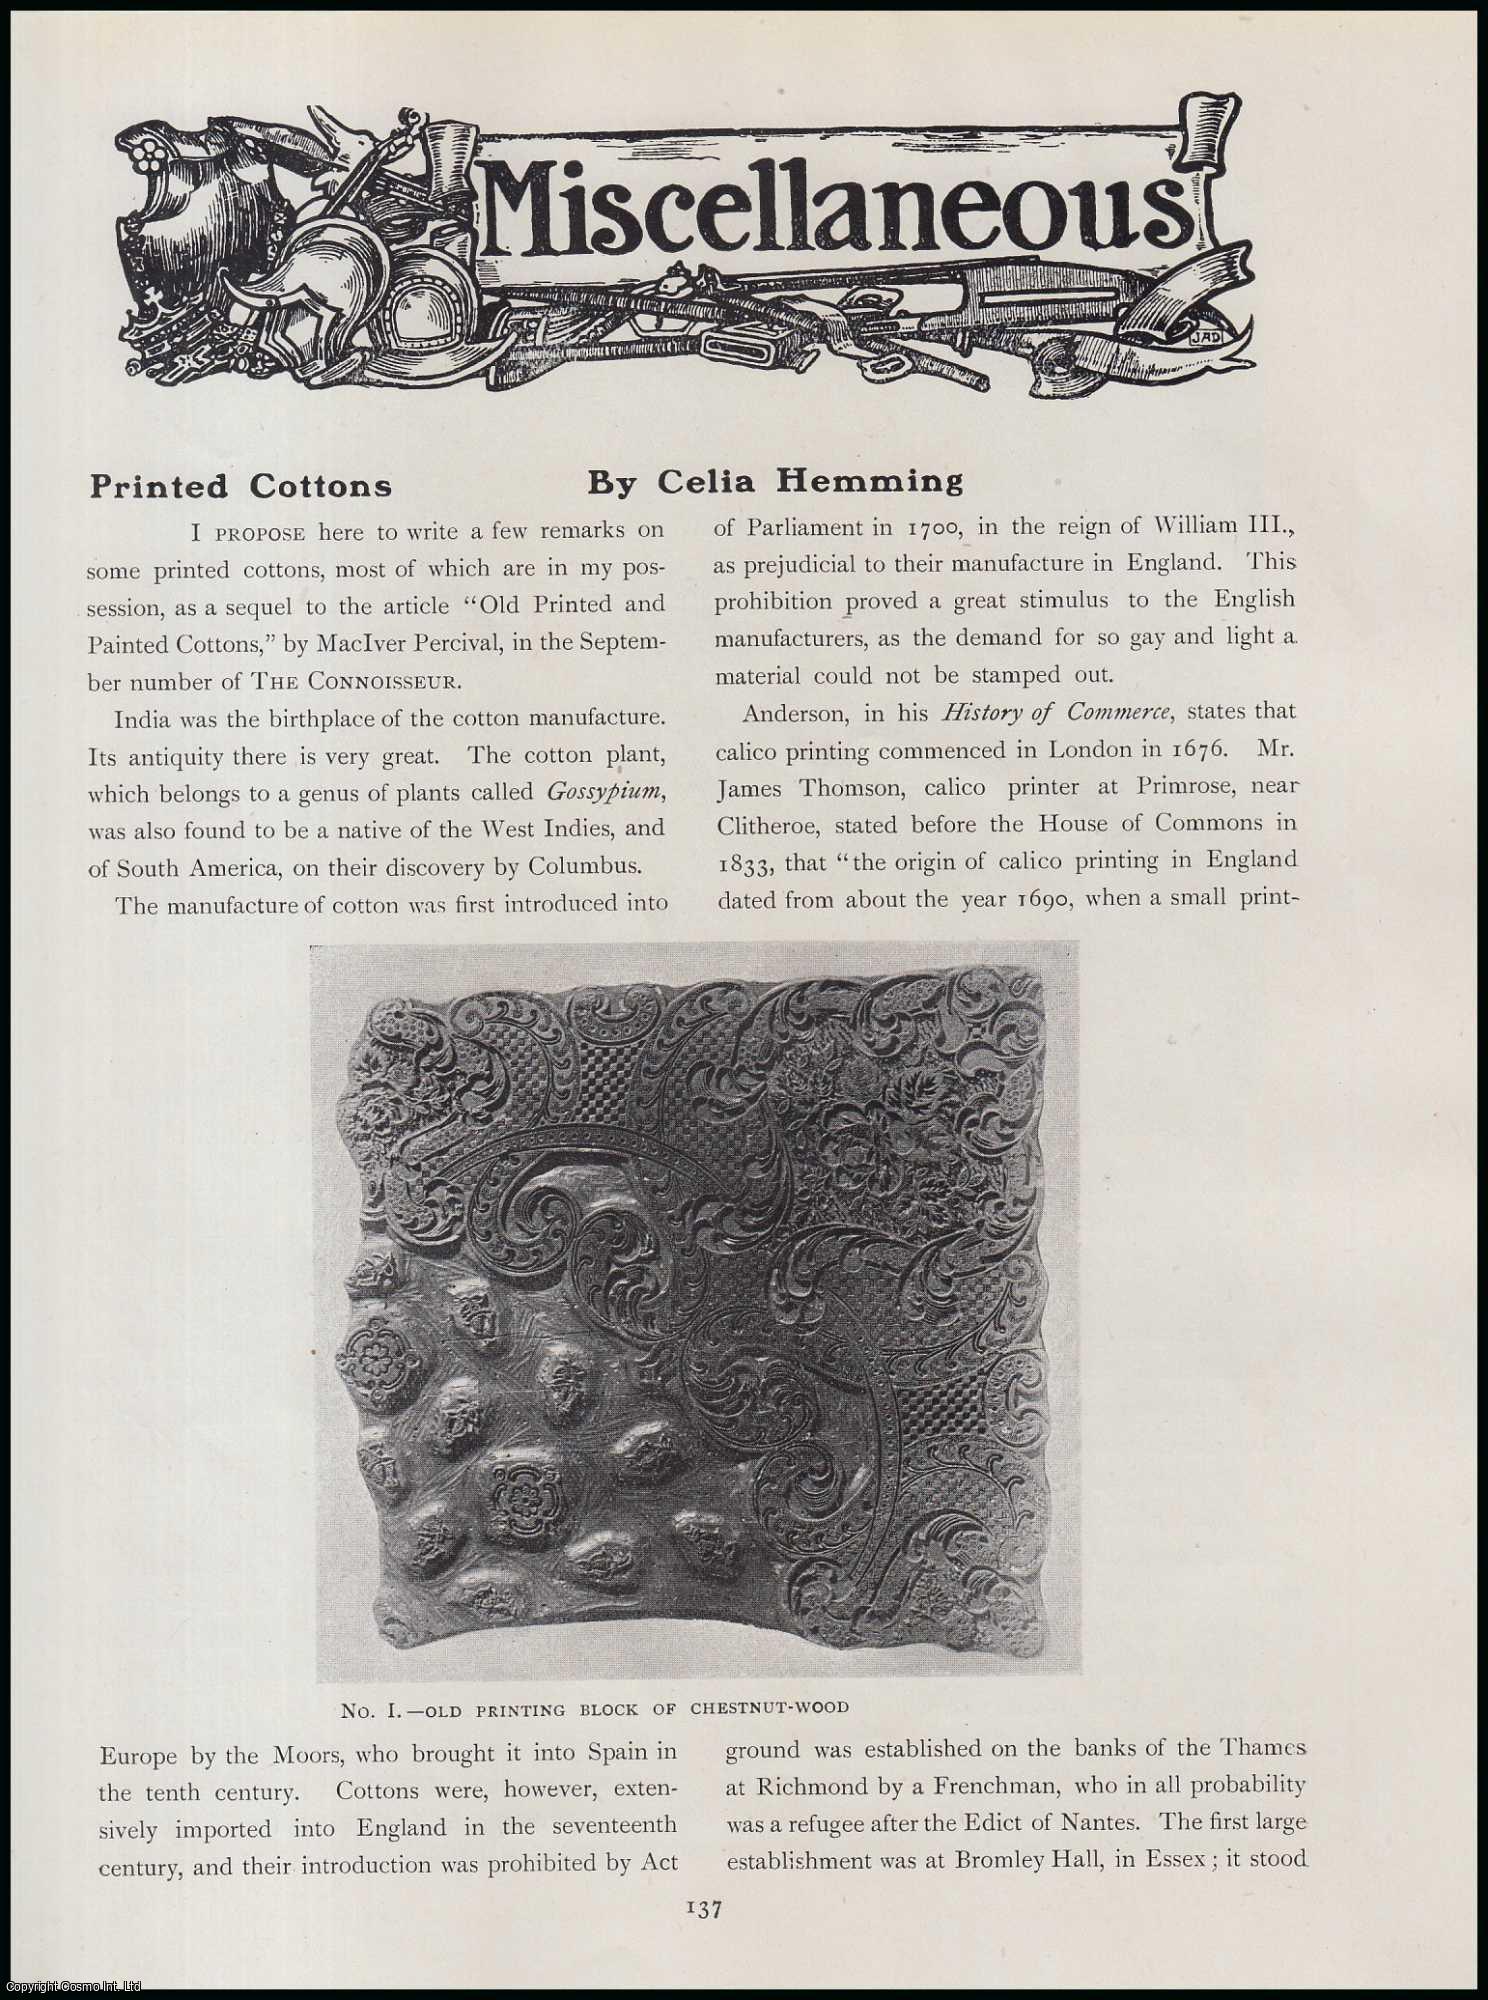 Celia Hemming - Printed Cottons. An original article from The Connoisseur, 1917.